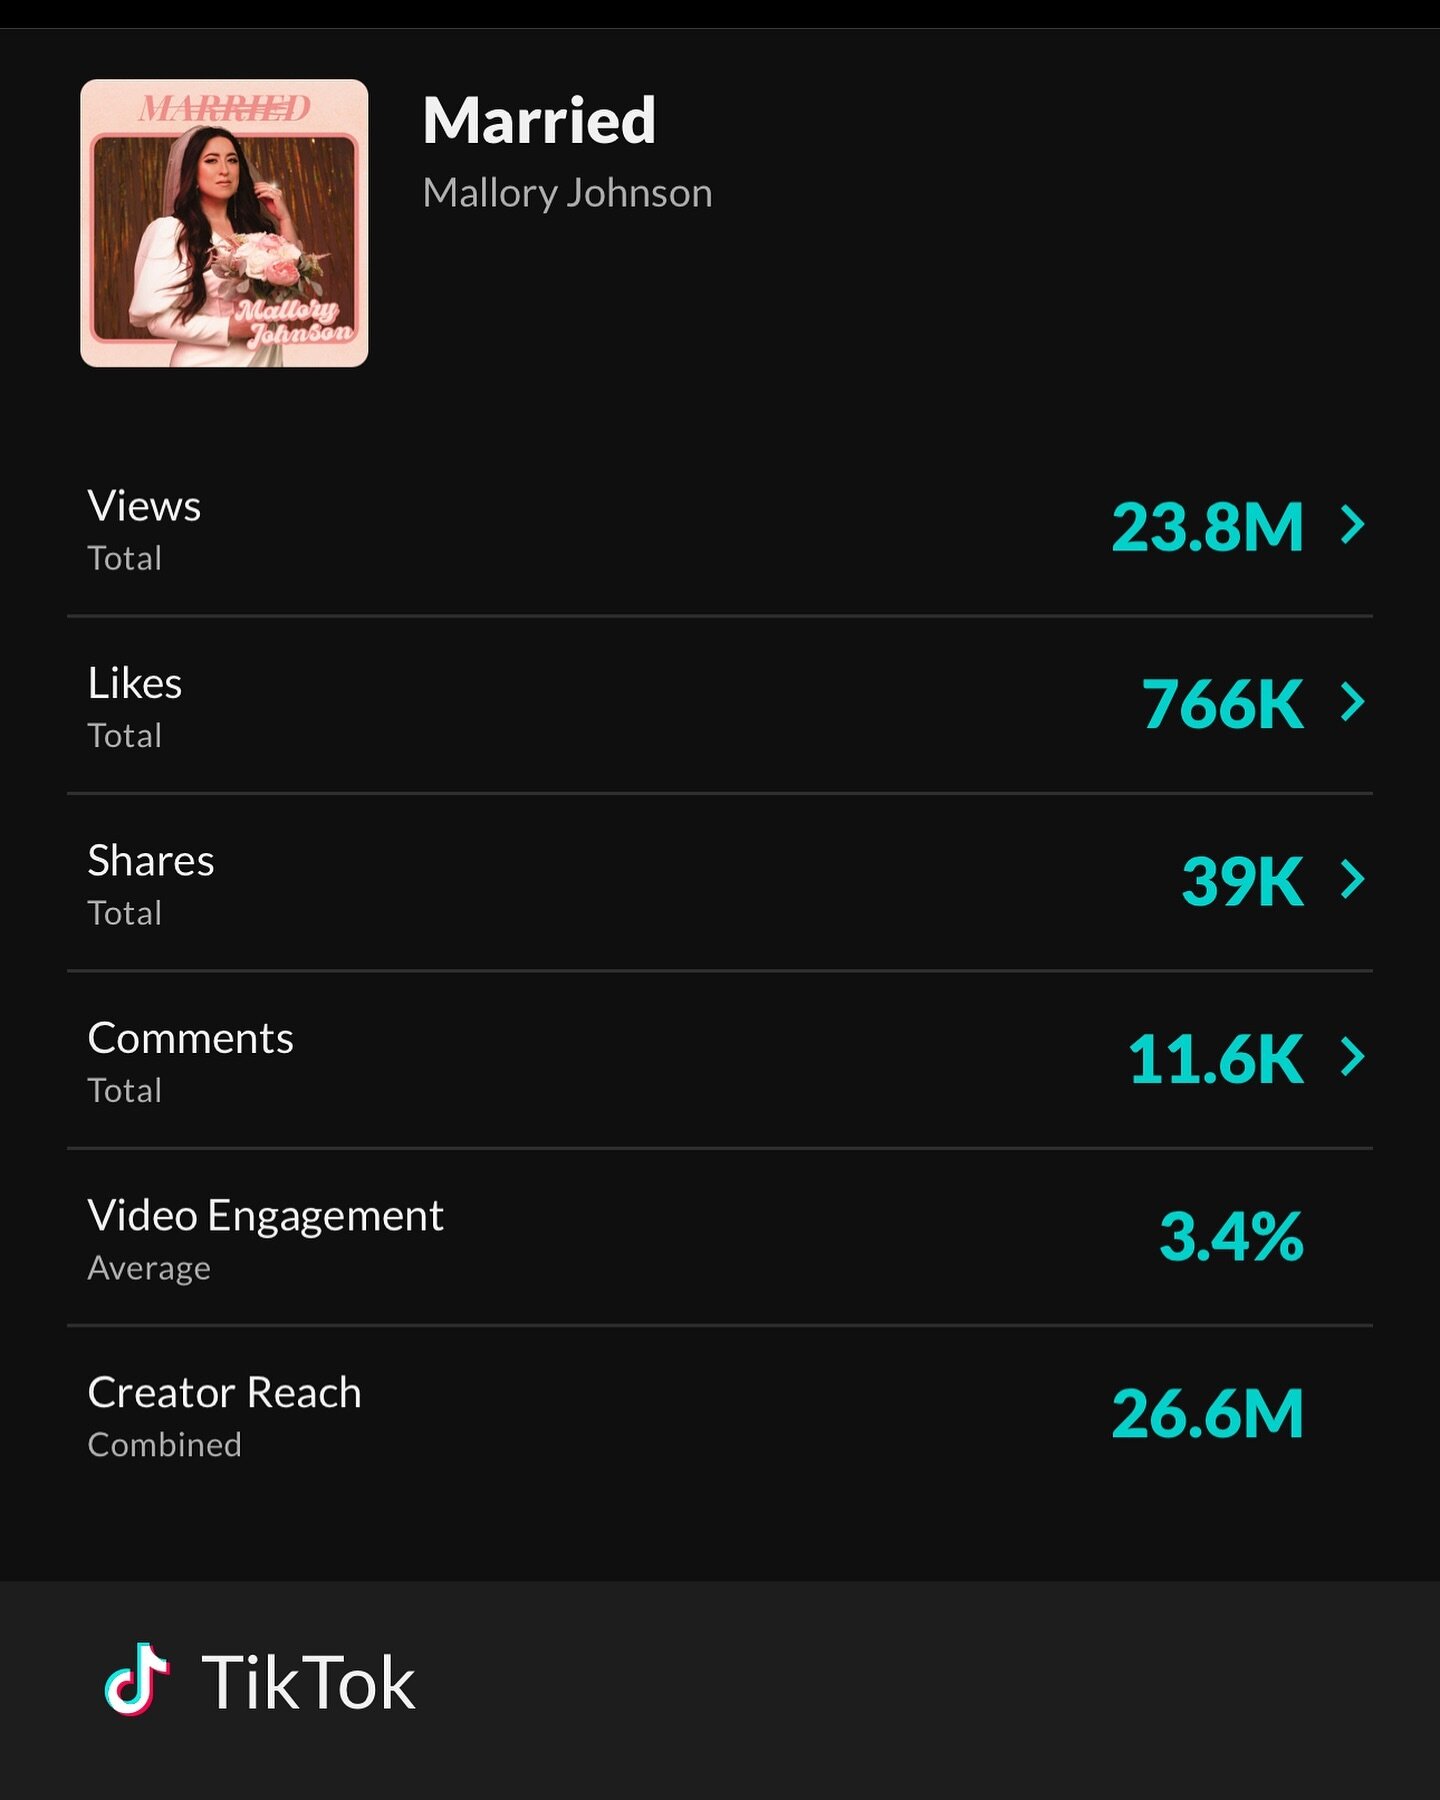 The song that just won&rsquo;t quit!! 
@maljohnsonmusic hitting 23M views on &ldquo;the other&rdquo; platform😉 with her song &ldquo;Married&rdquo; 🎉💍🍾

CONGRATS Maggie! &hearts;️&hearts;️&hearts;️

✍️: @maljohnsonmusic @patriciaconroy @jasonblain